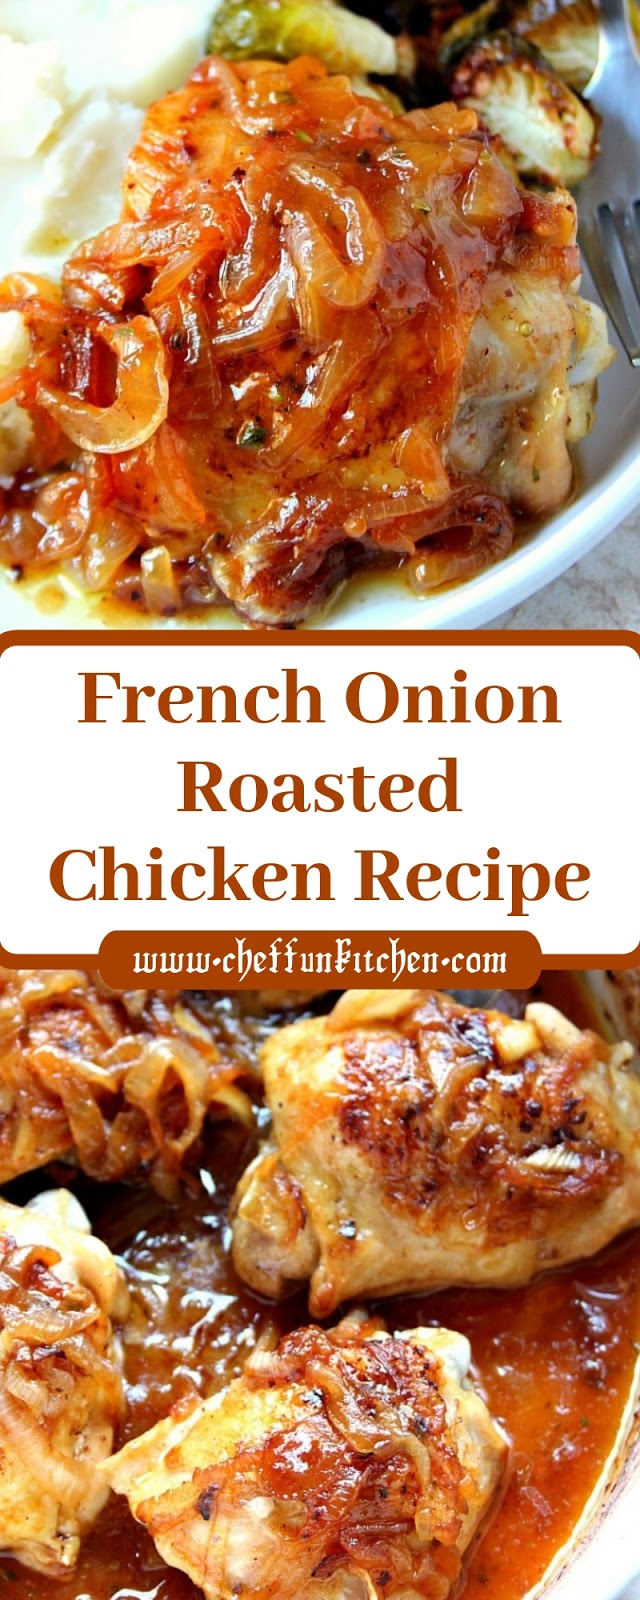 French Onion Roasted Chicken Recipe